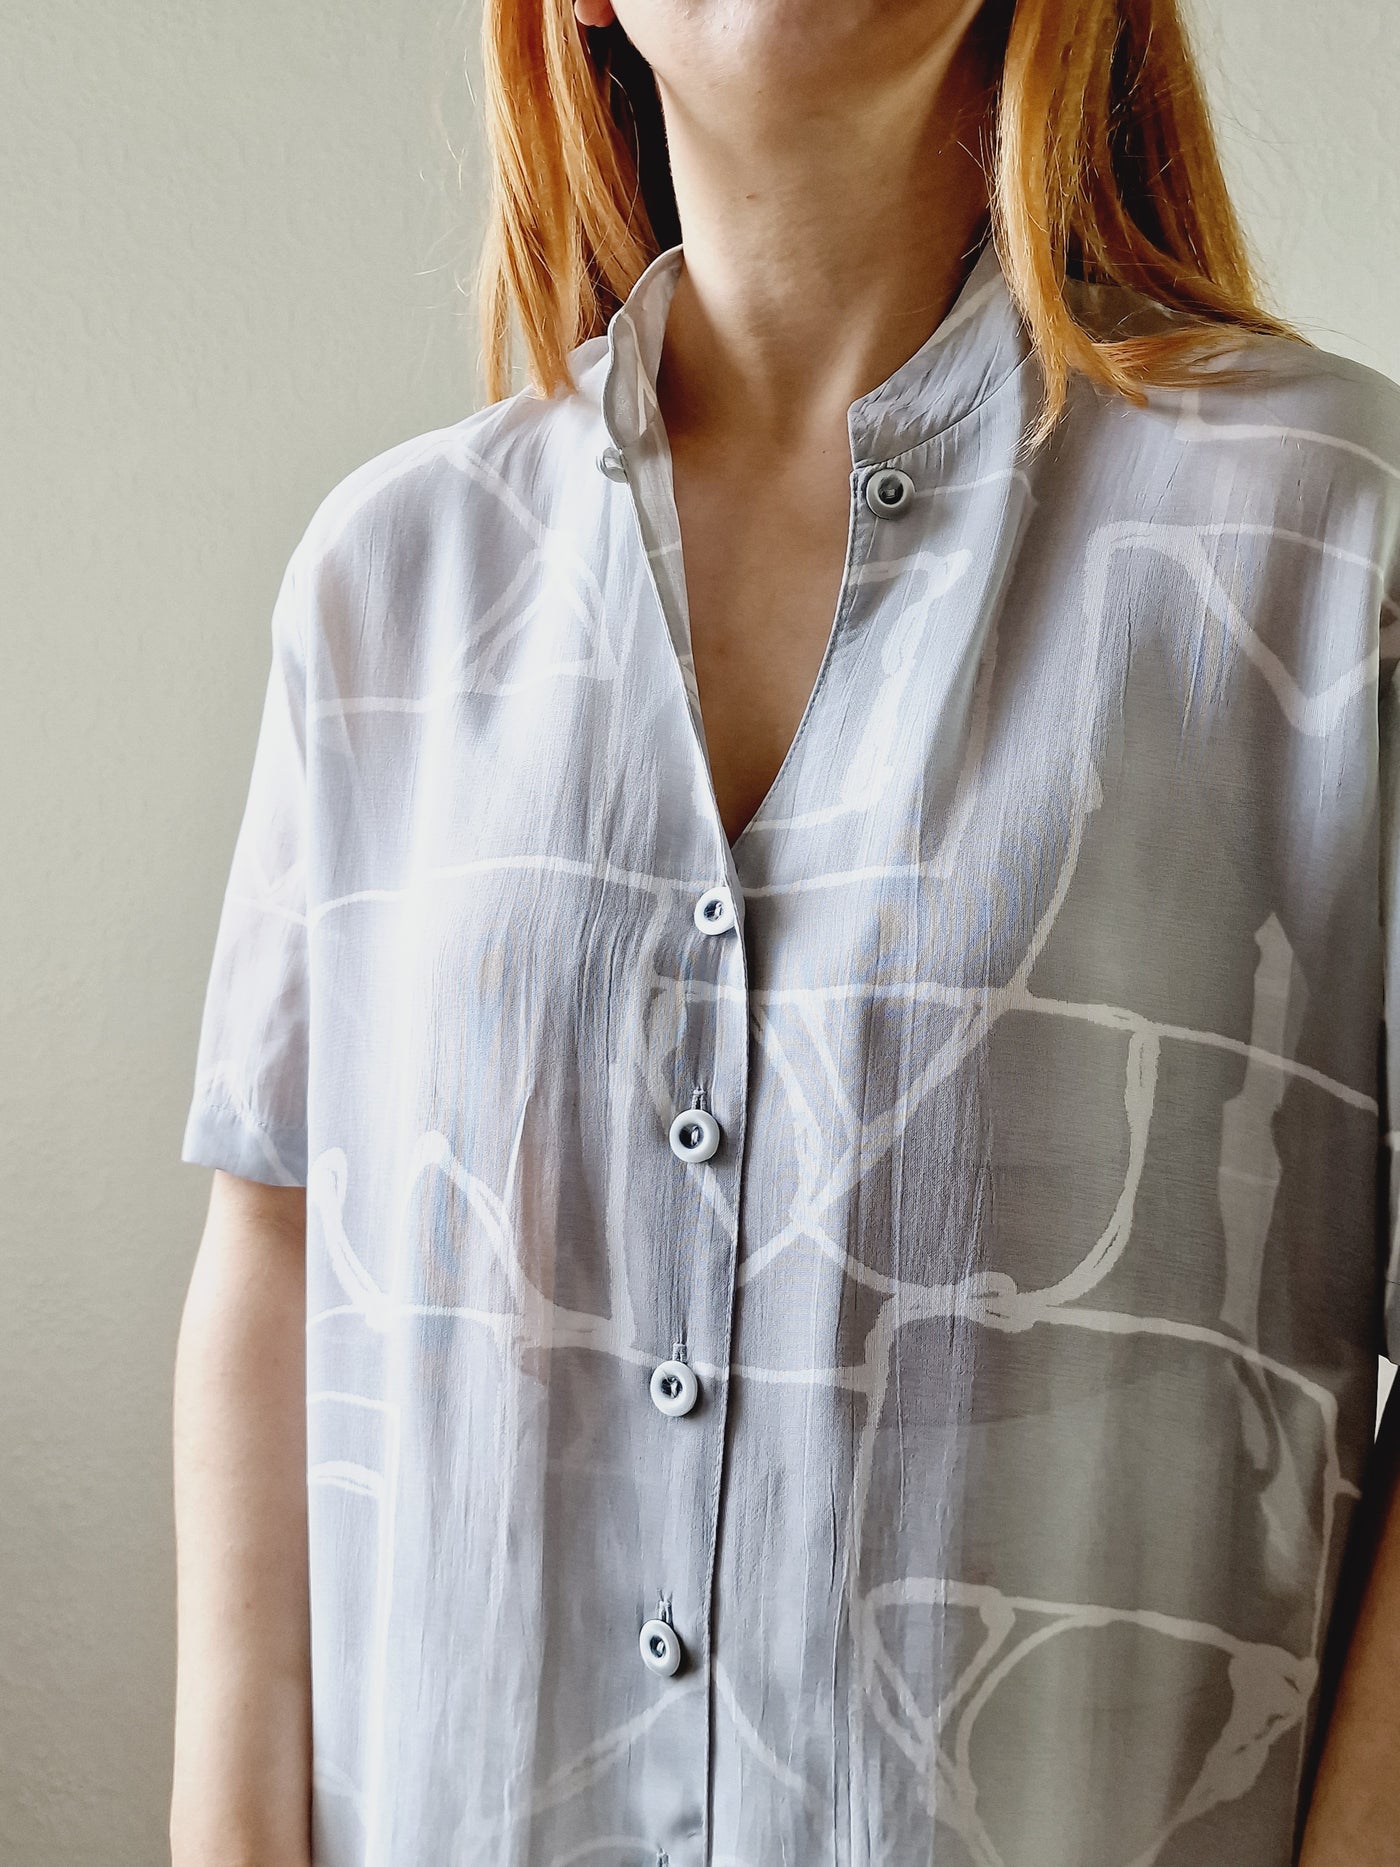 Vintage 90s Light Grey Short Sleeve Blouse with an Abstract Print - M